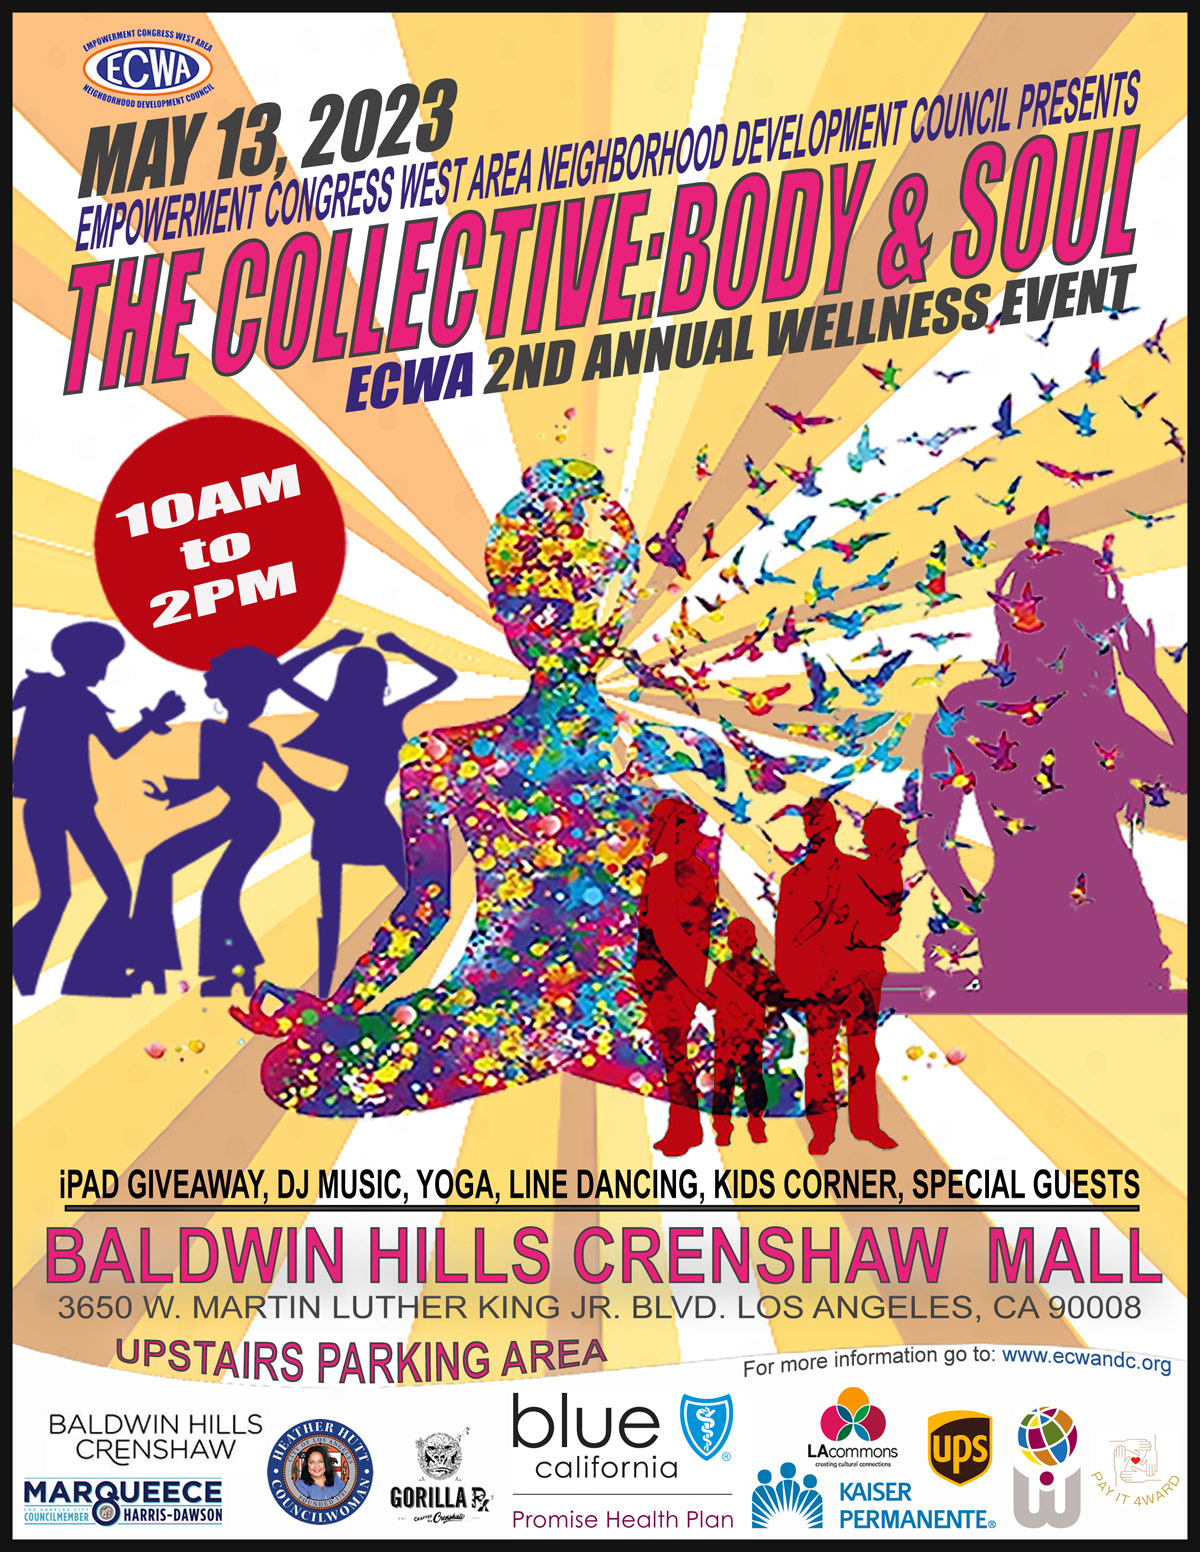 The Collective Body & Soul